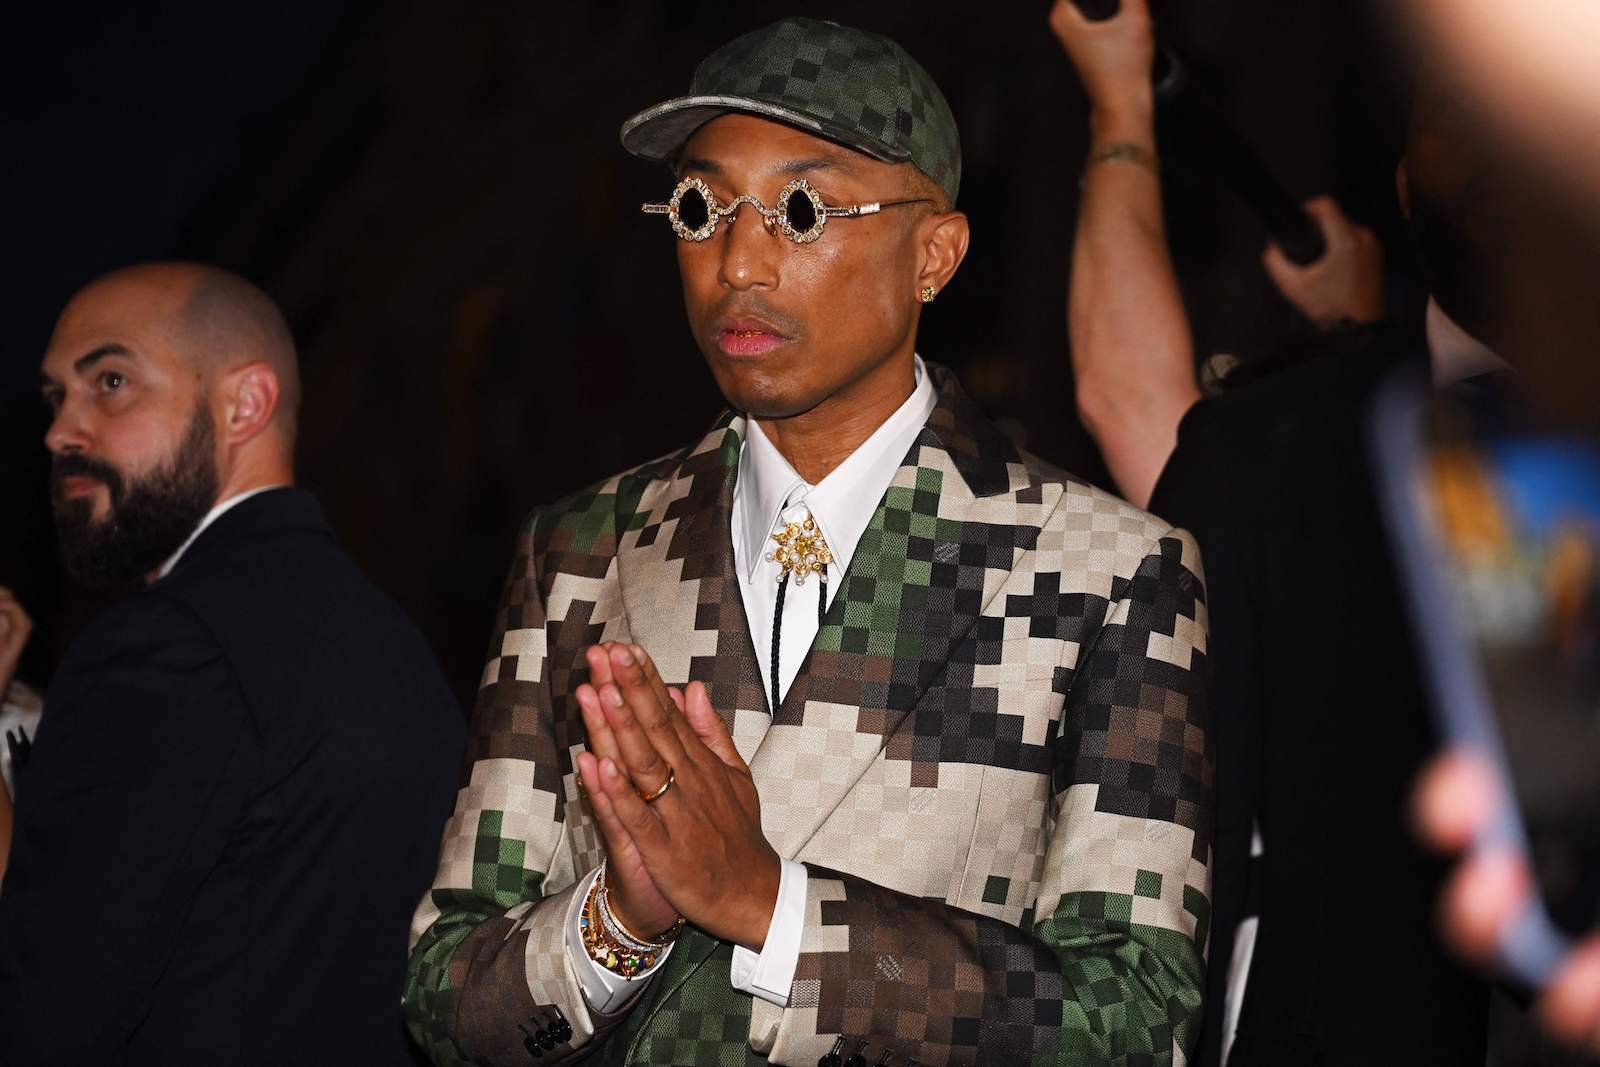 Pharrell's First Show for Louis Vuitton Had Star-Studded Front Row